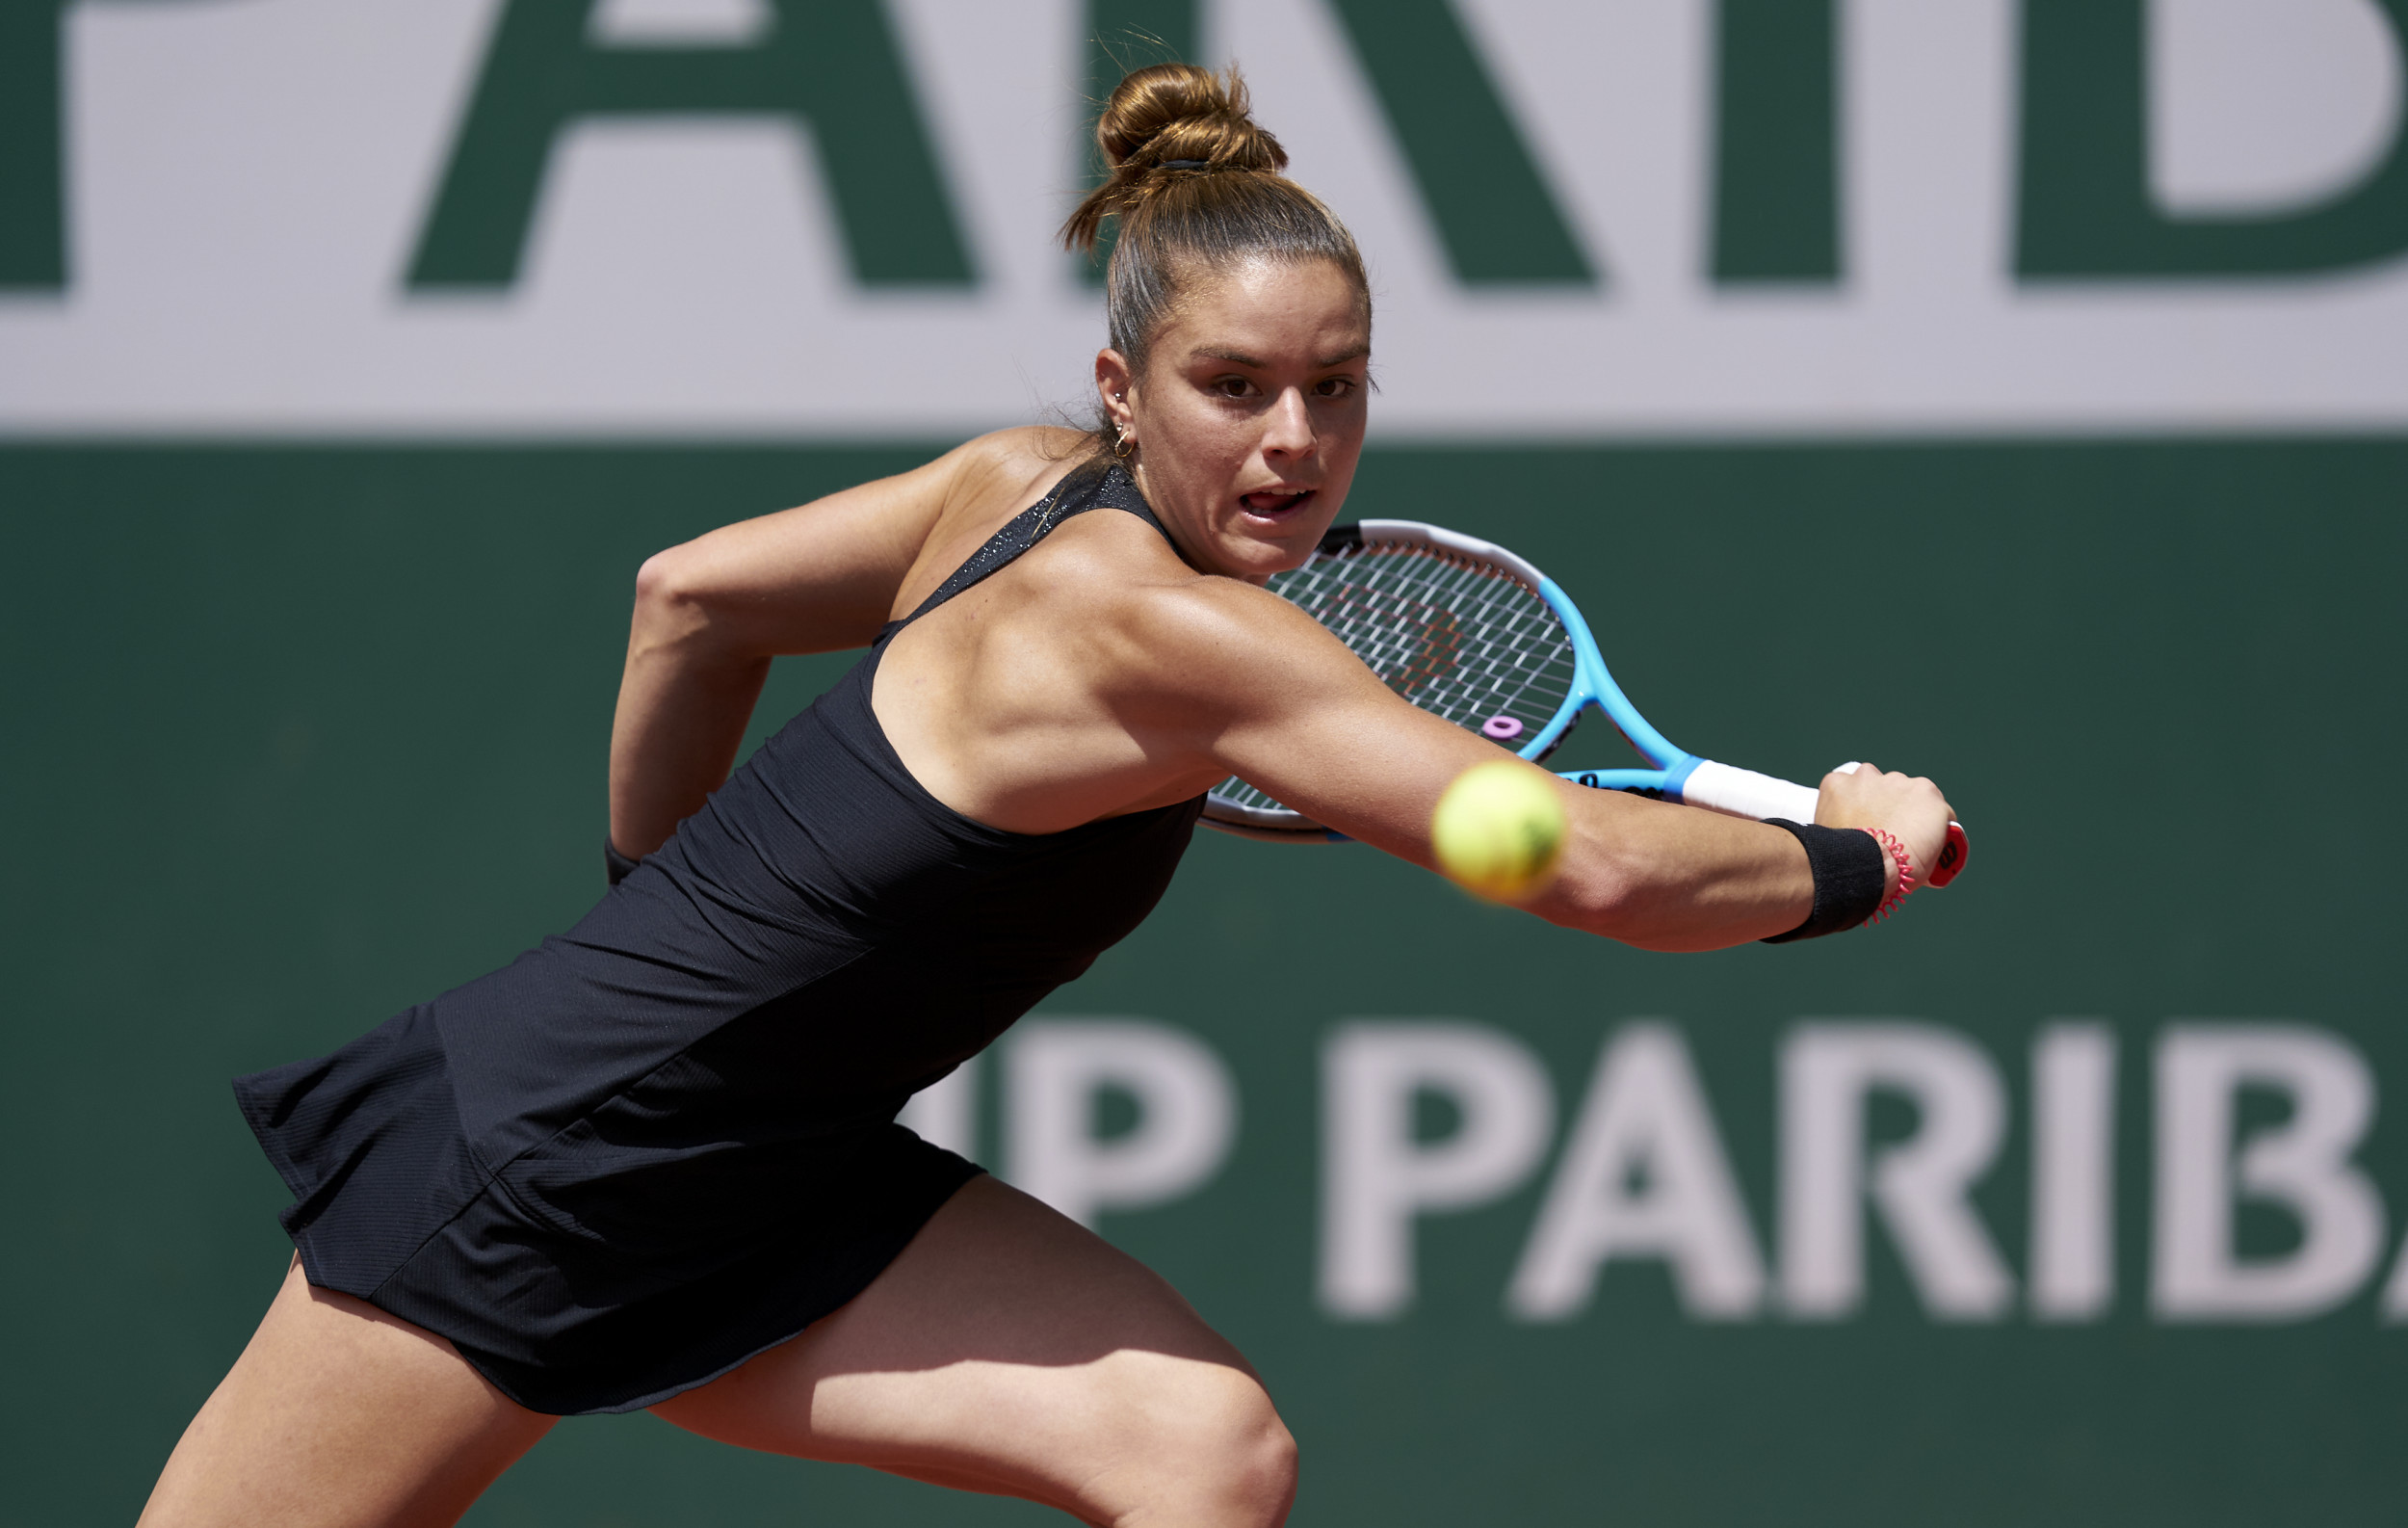 French Open Tennis 2021 Womens Semifinal Start Time, How to Watch, Live Stream and Odds